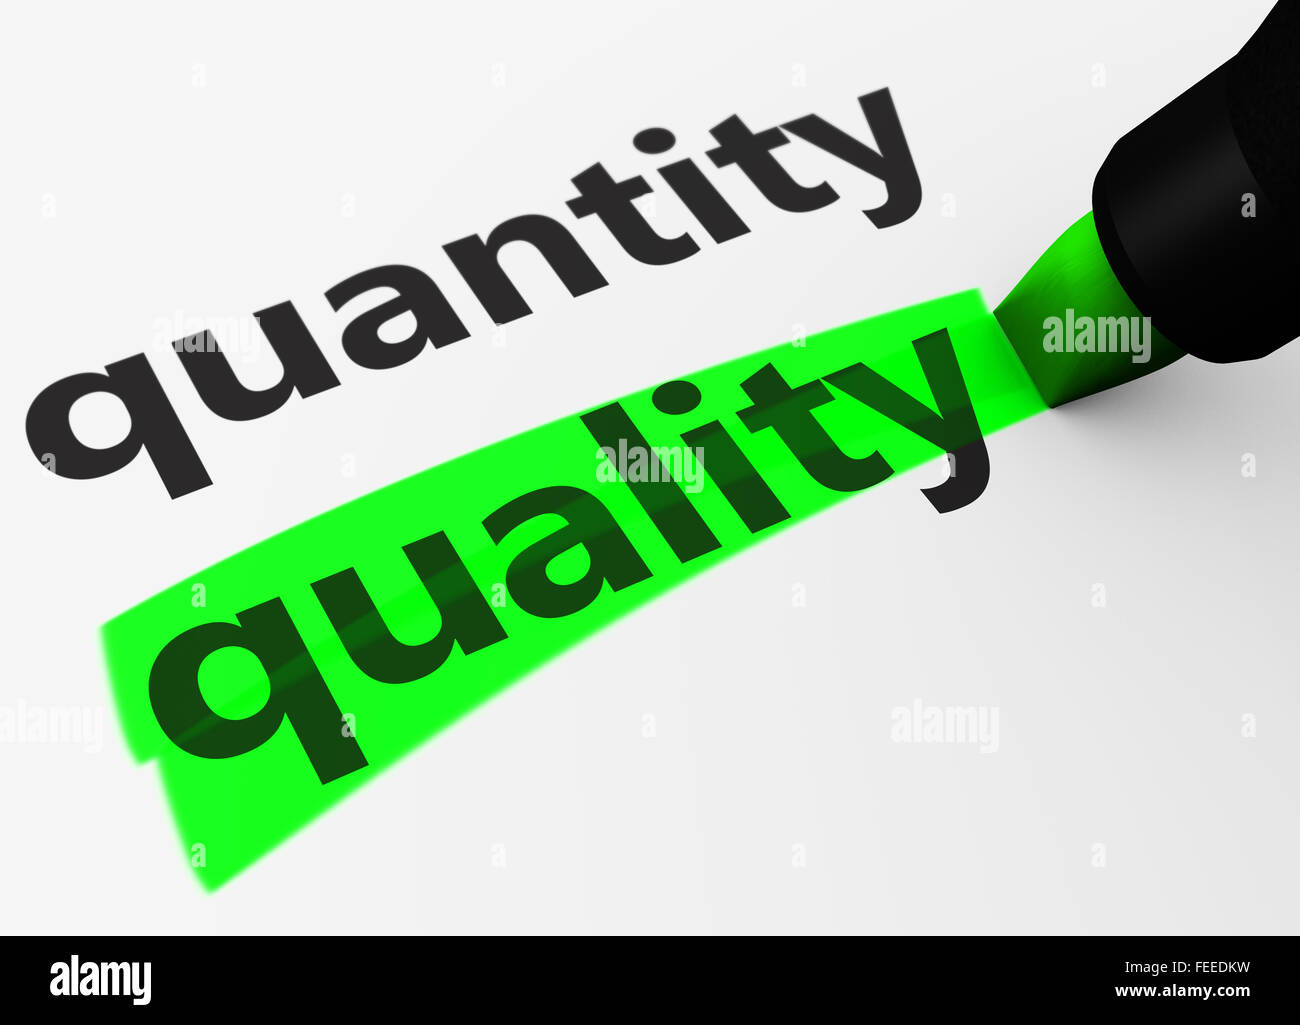 Quality versus quantity business concept with a 3d render of words and text highlighted with a green marker. Stock Photo